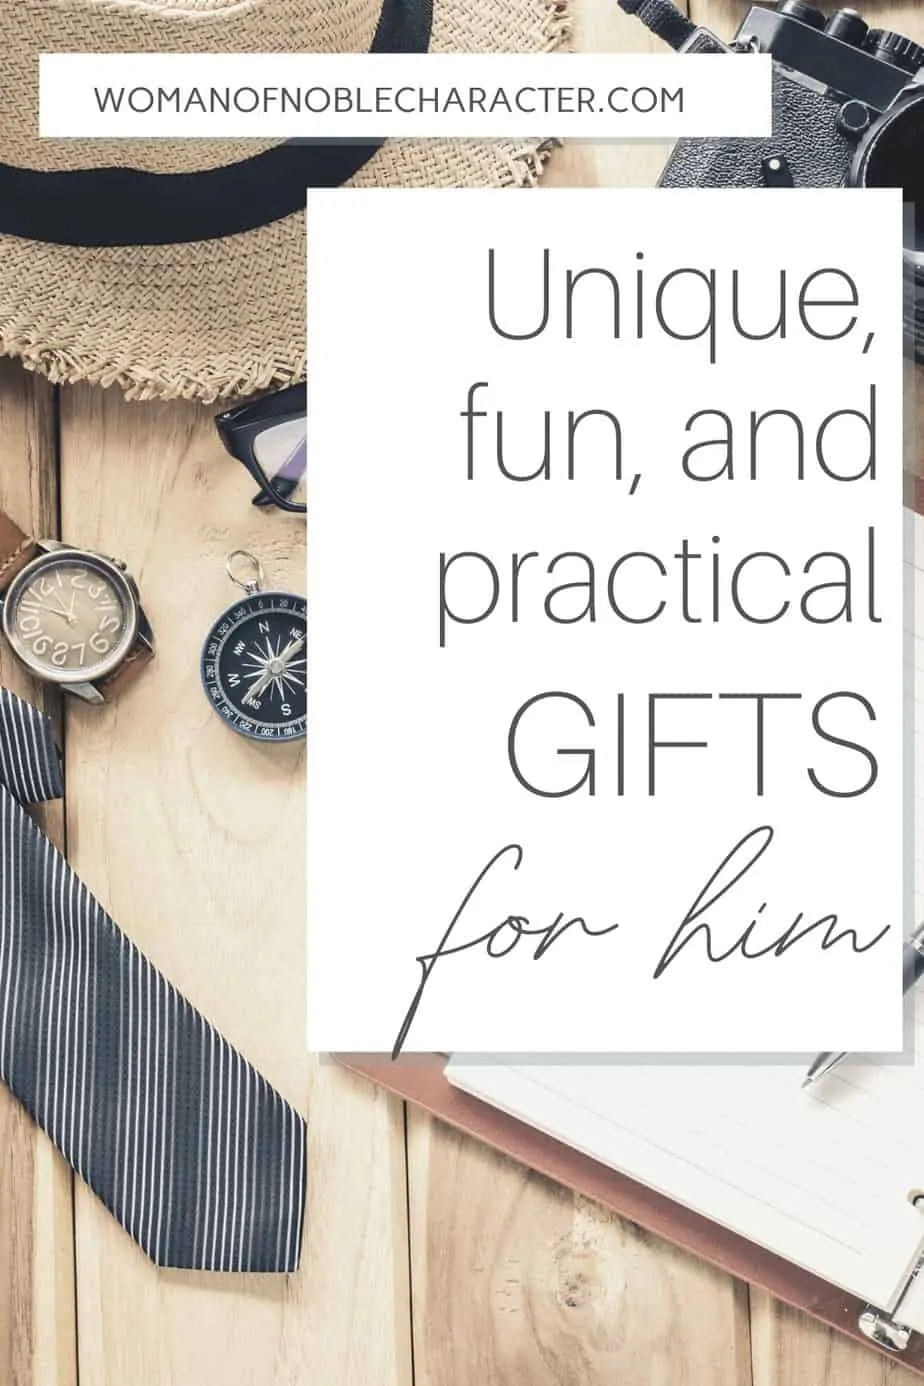 Get the best gift ideas for your significant other. Your husband will be thrilled with these presents!